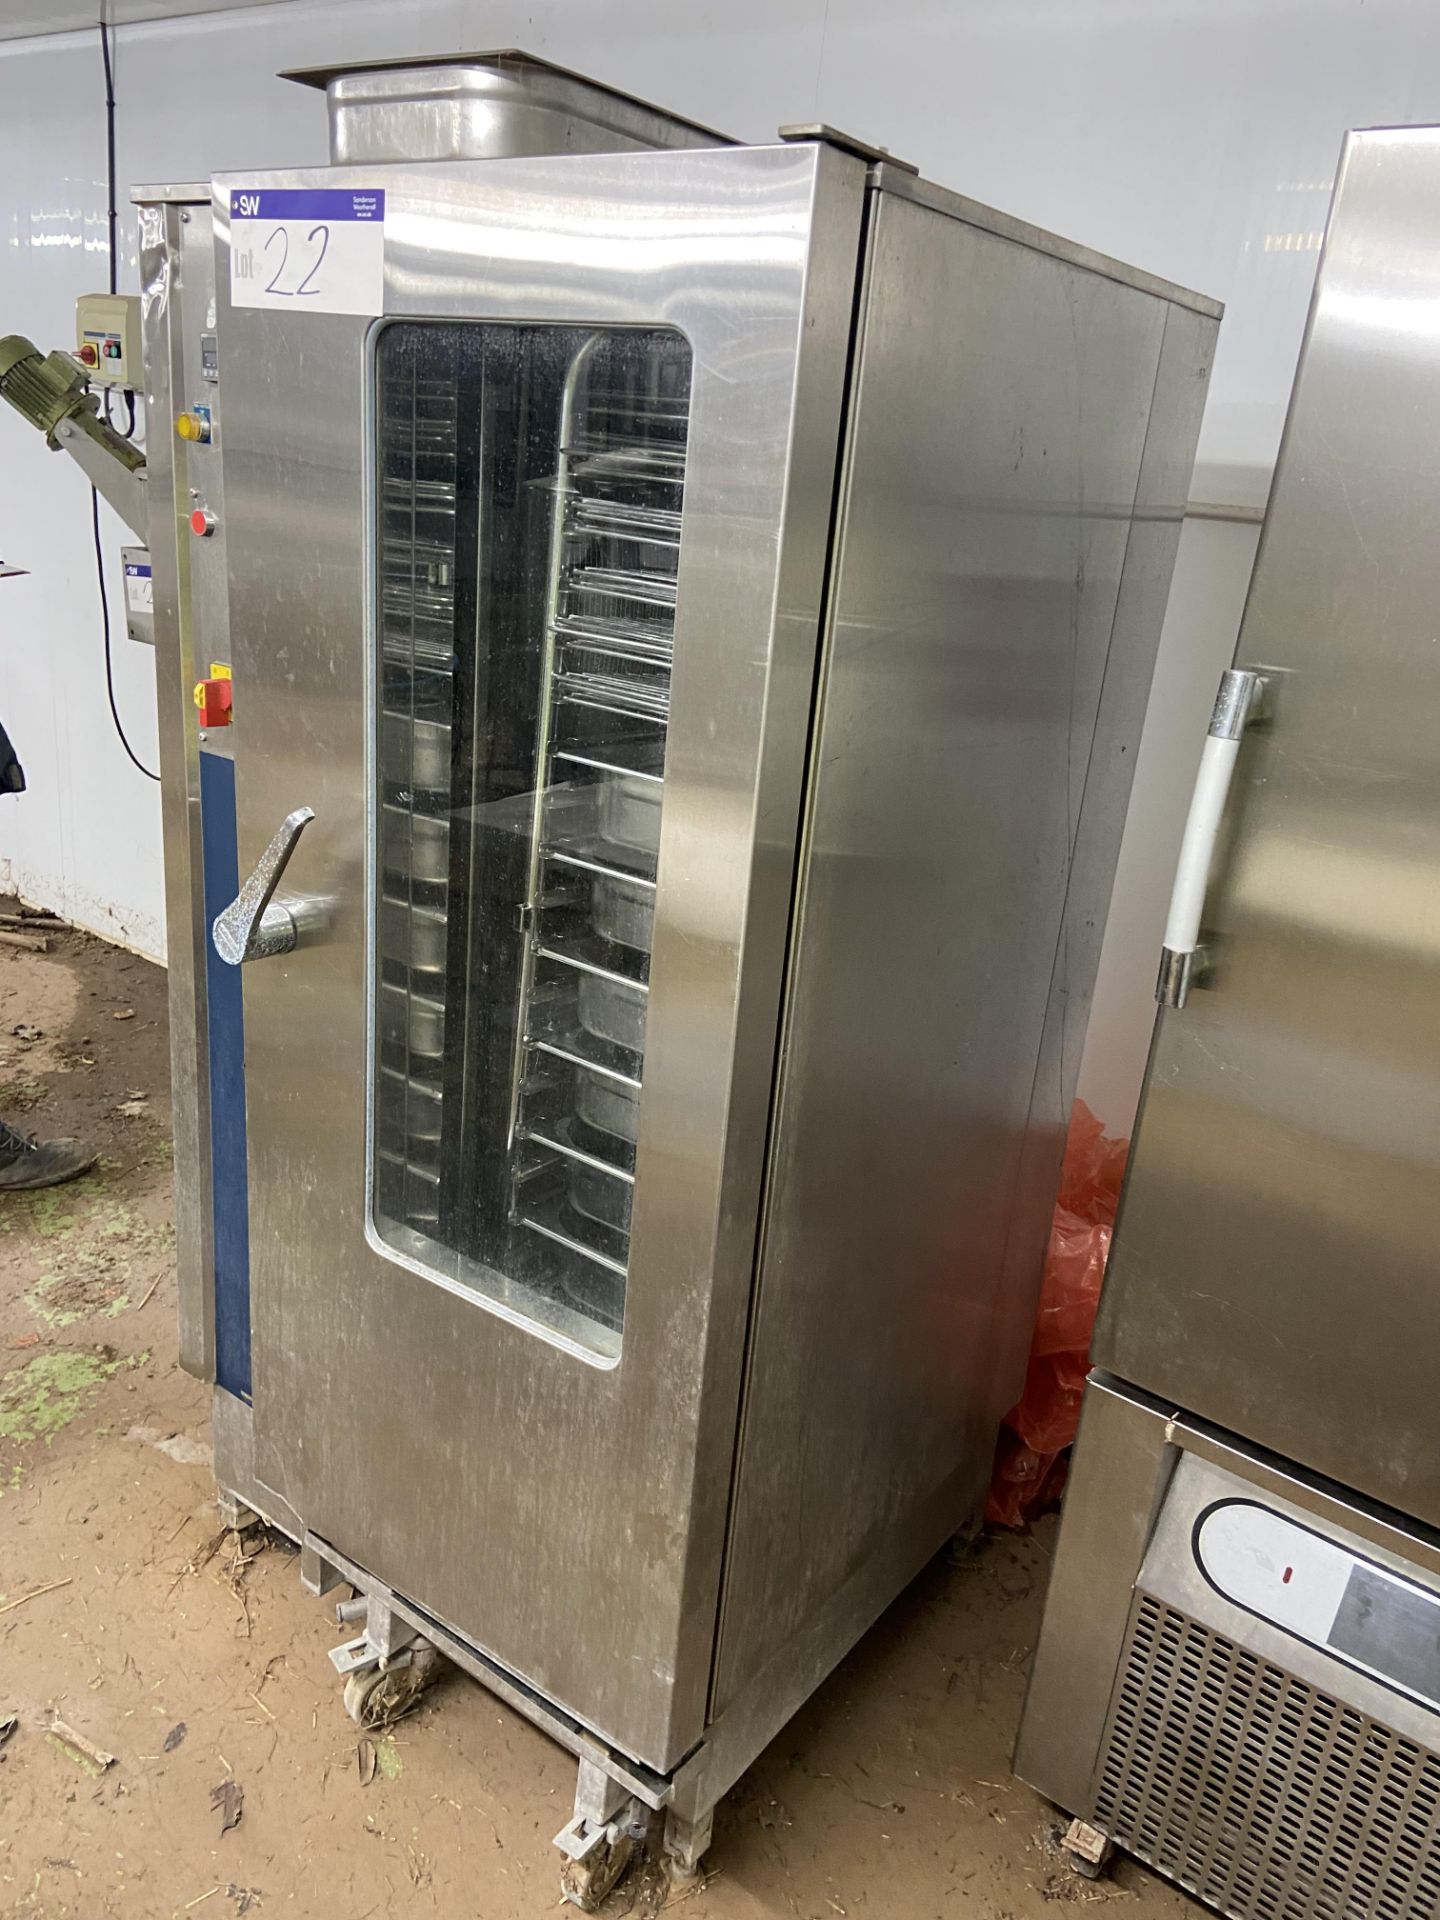 Rational CD201 CLOTTED CREAM HEATER/ OVEN, with multi-tray mobile rack, serial no. 20192031103, with - Image 4 of 7